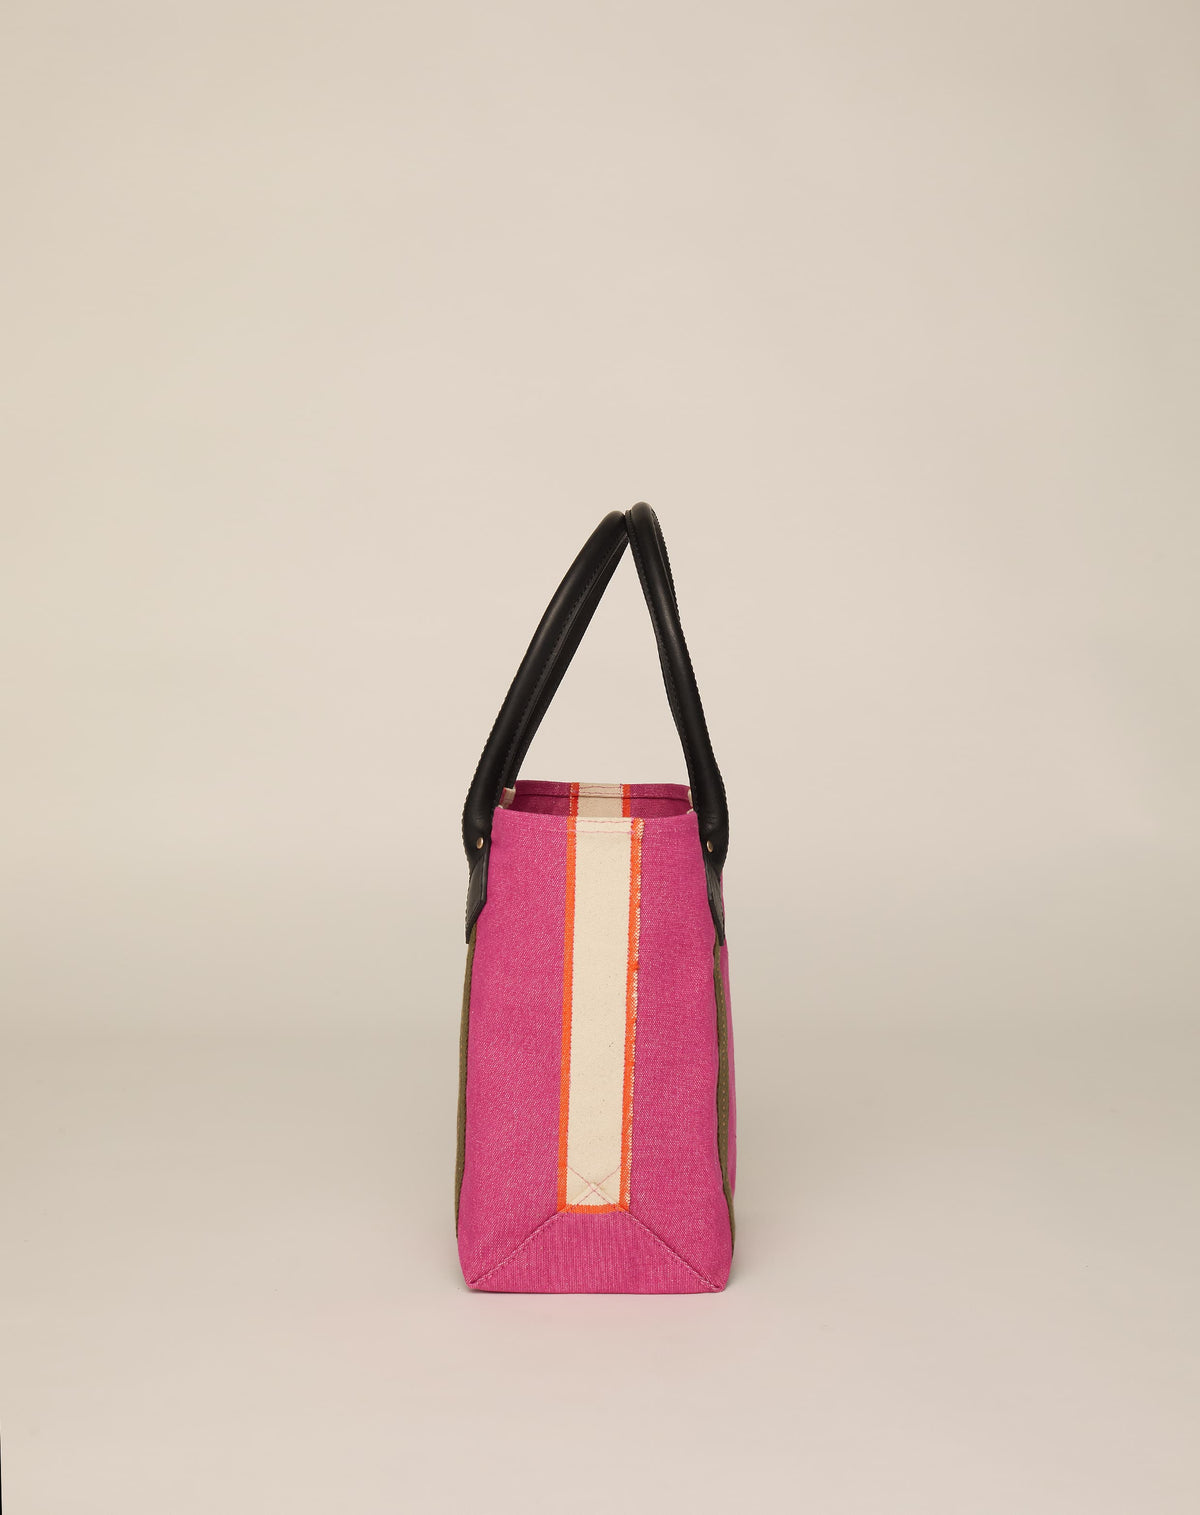 Side image of small classic canvas tote bag in fuchsia colour with black leather handles and contrasting stripes.